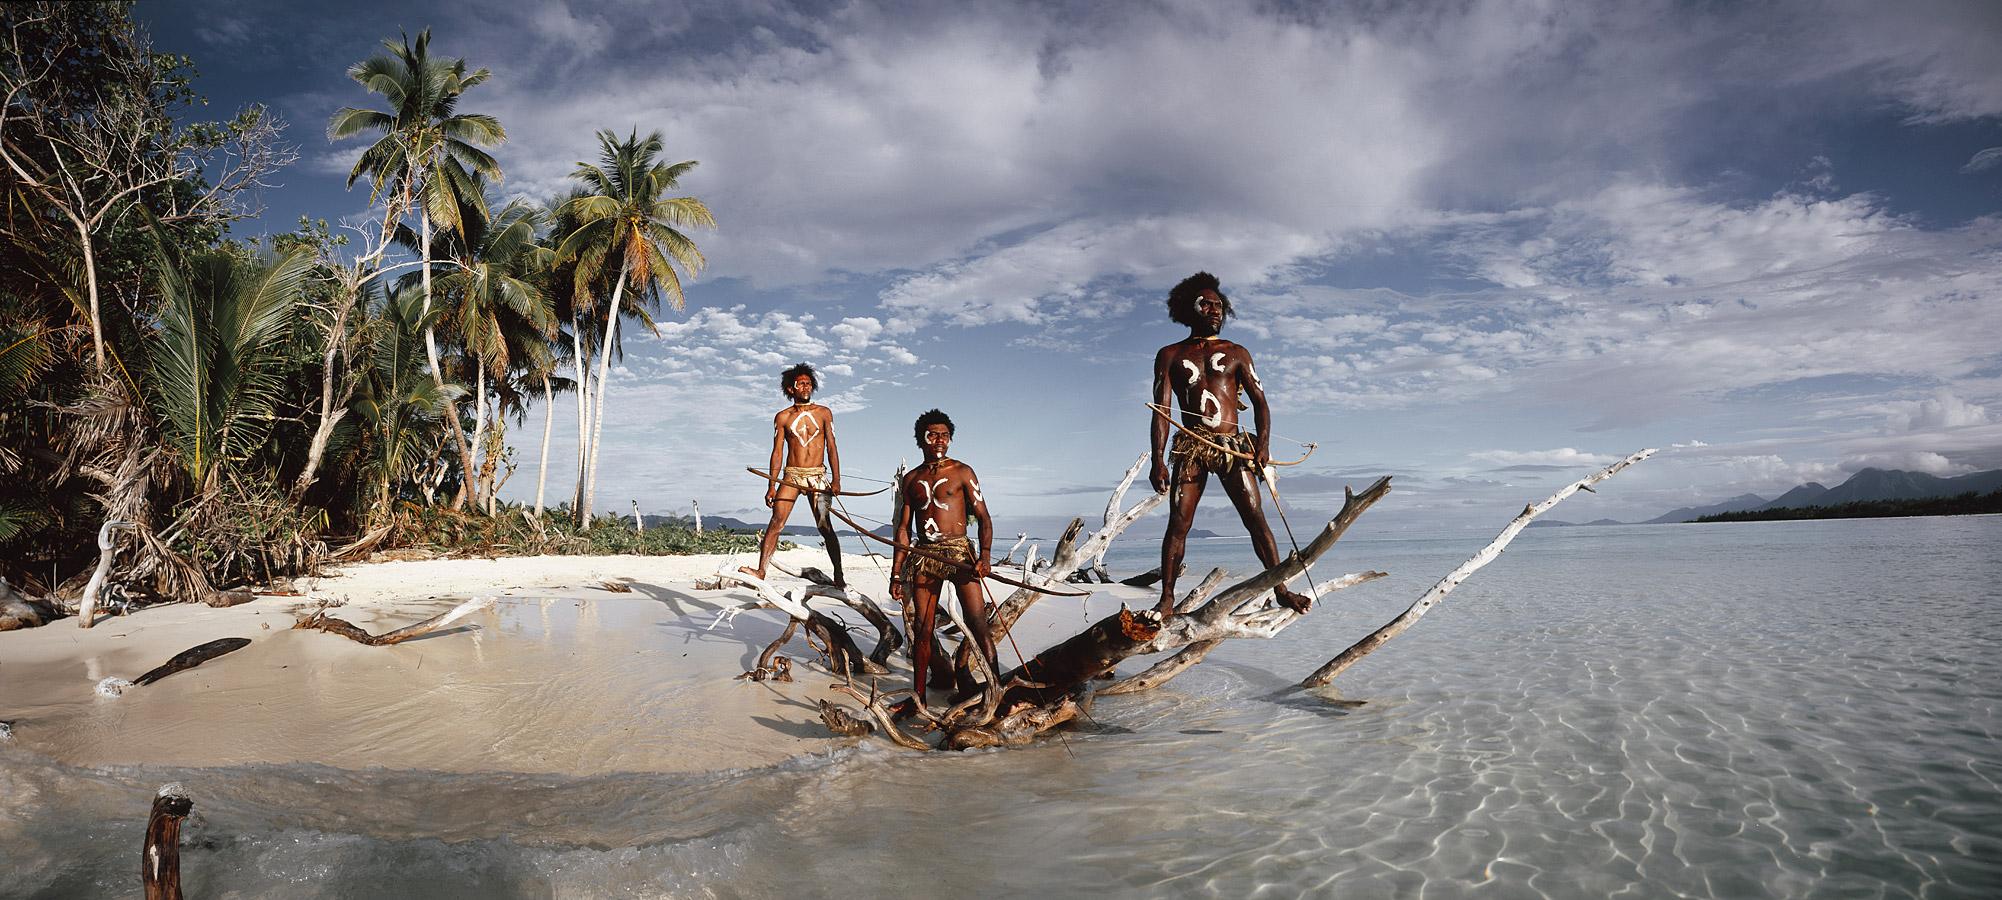 "XXI 306 - Ni Vanuatu Men -  Rah lava Island, Torba Province - Vanuatu Islands, 2011

Settlement on the 85 Vanuatu islands dates back to around 500 BC. There is evidence that Melanesian navigators from Papua New Guinea were the first to colonise